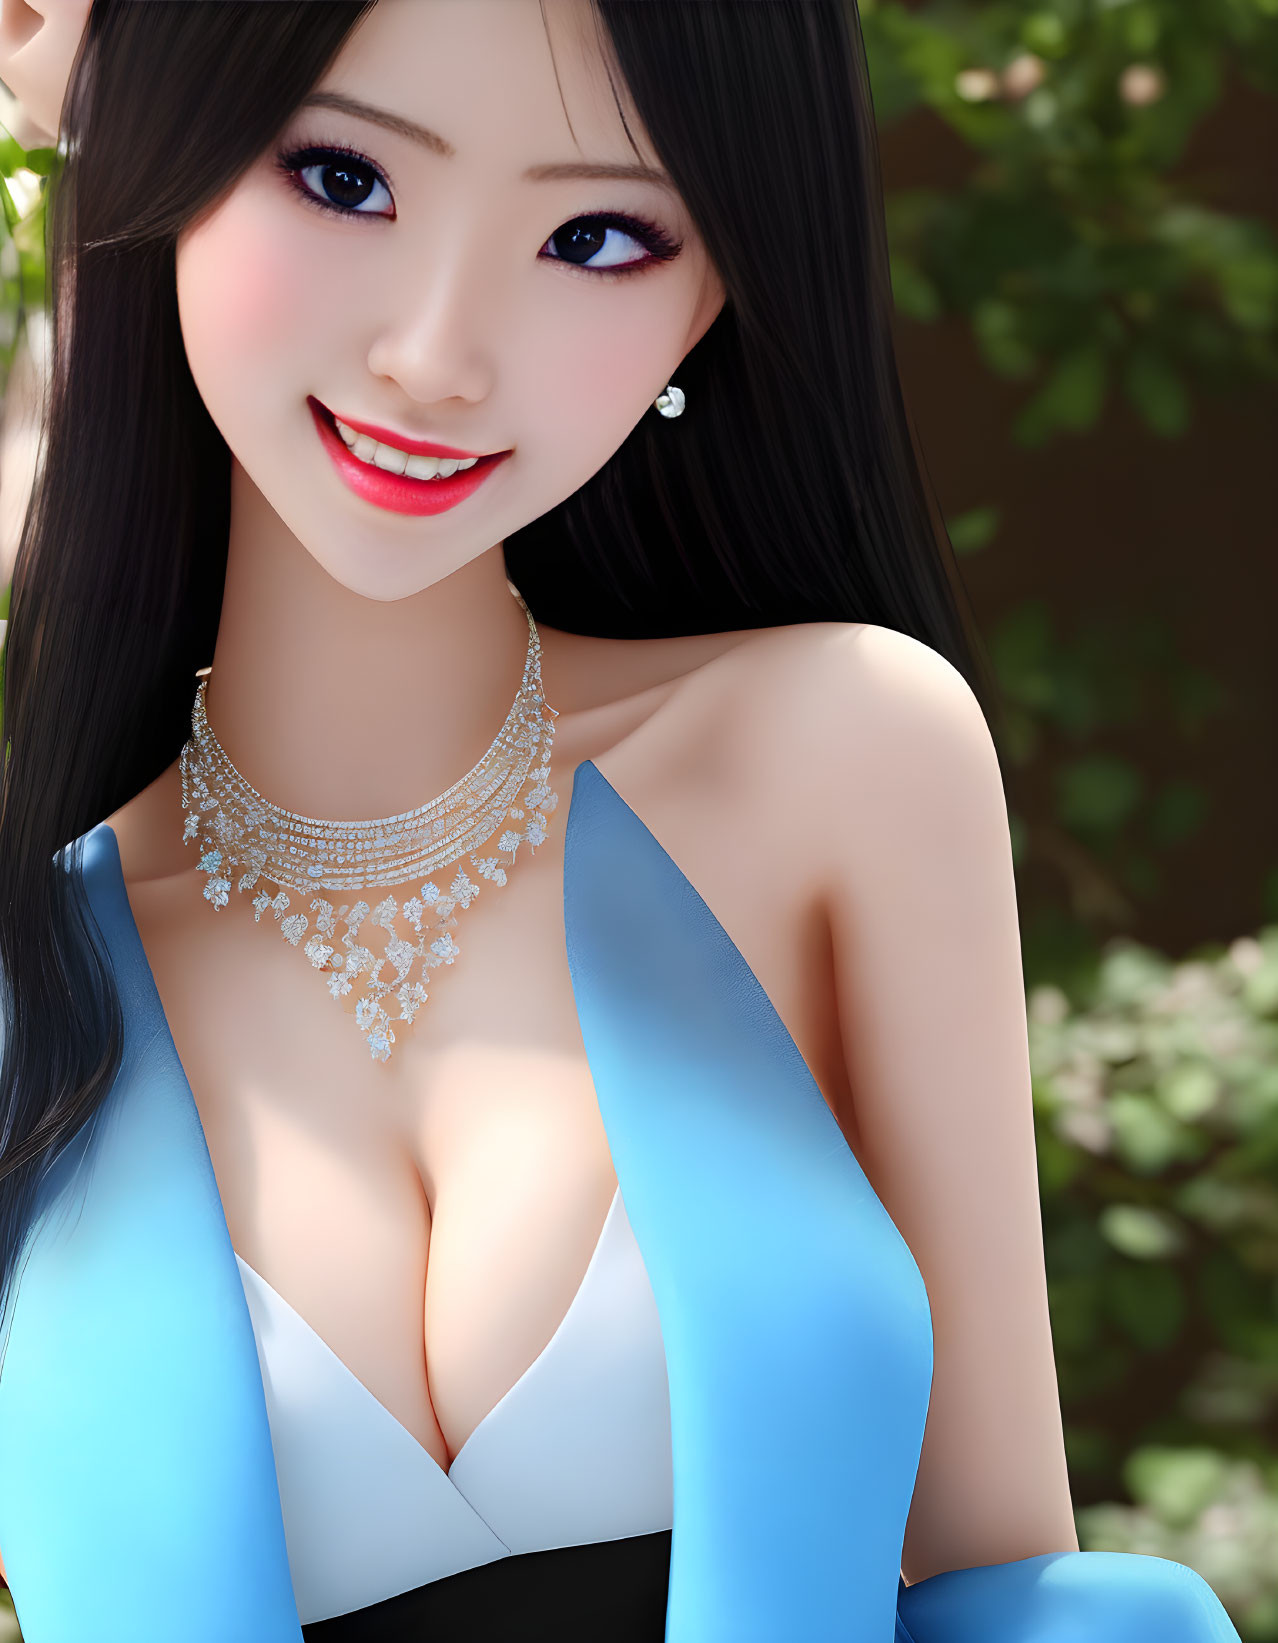 Digital portrait of woman with long black hair, sparkling jewelry, blue and white outfit, blurred green background